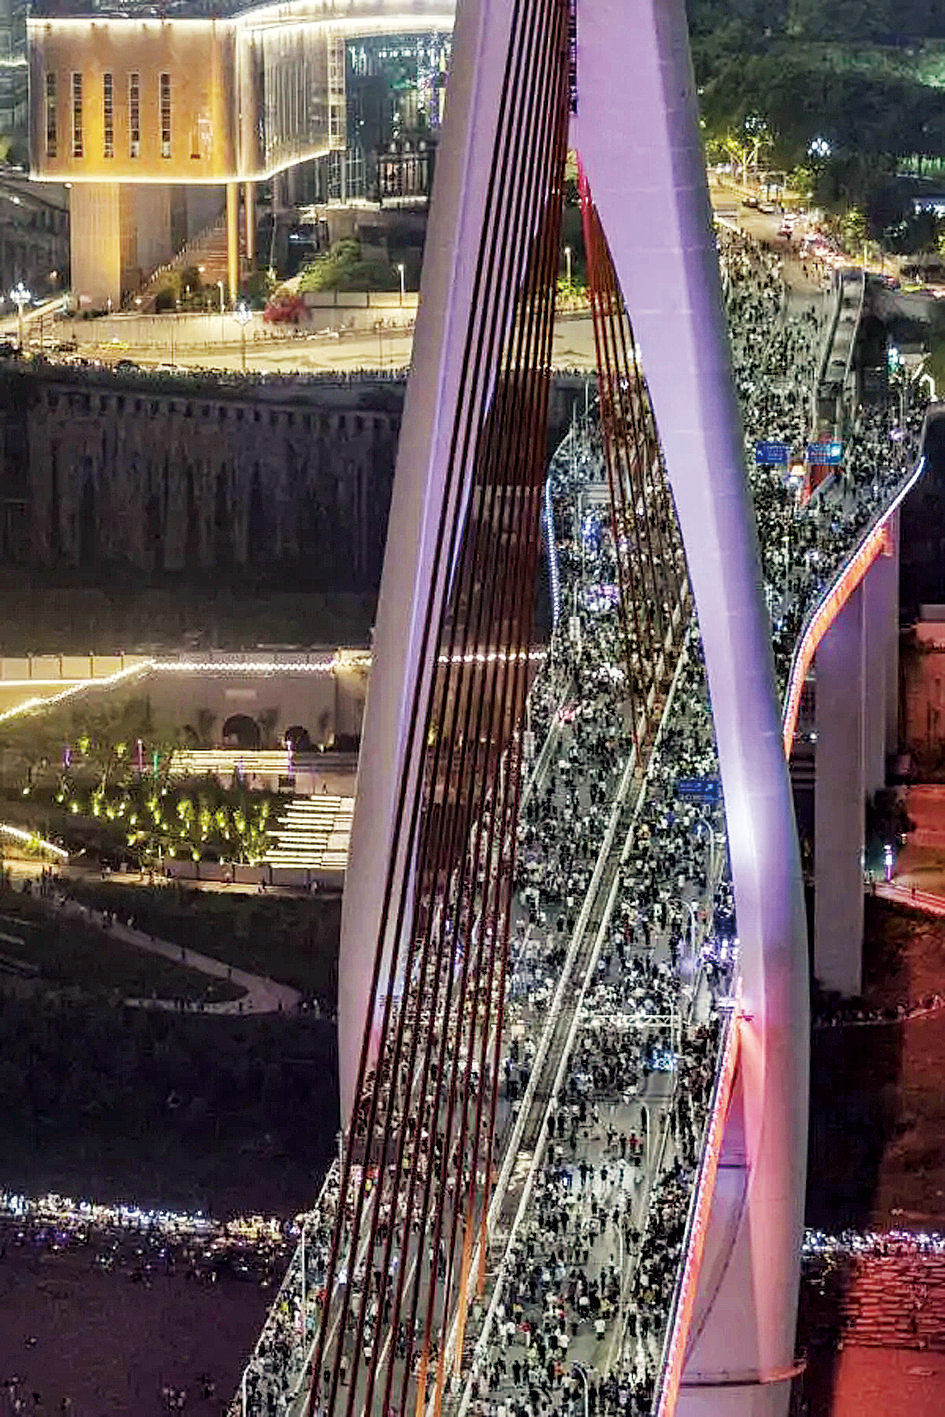 When tourists wanted to take photo for Hongyadong from another perspective, Chongqing made Qiansimen Bridge available for tourists as the “World’s Largest Footbridge” during holidays.